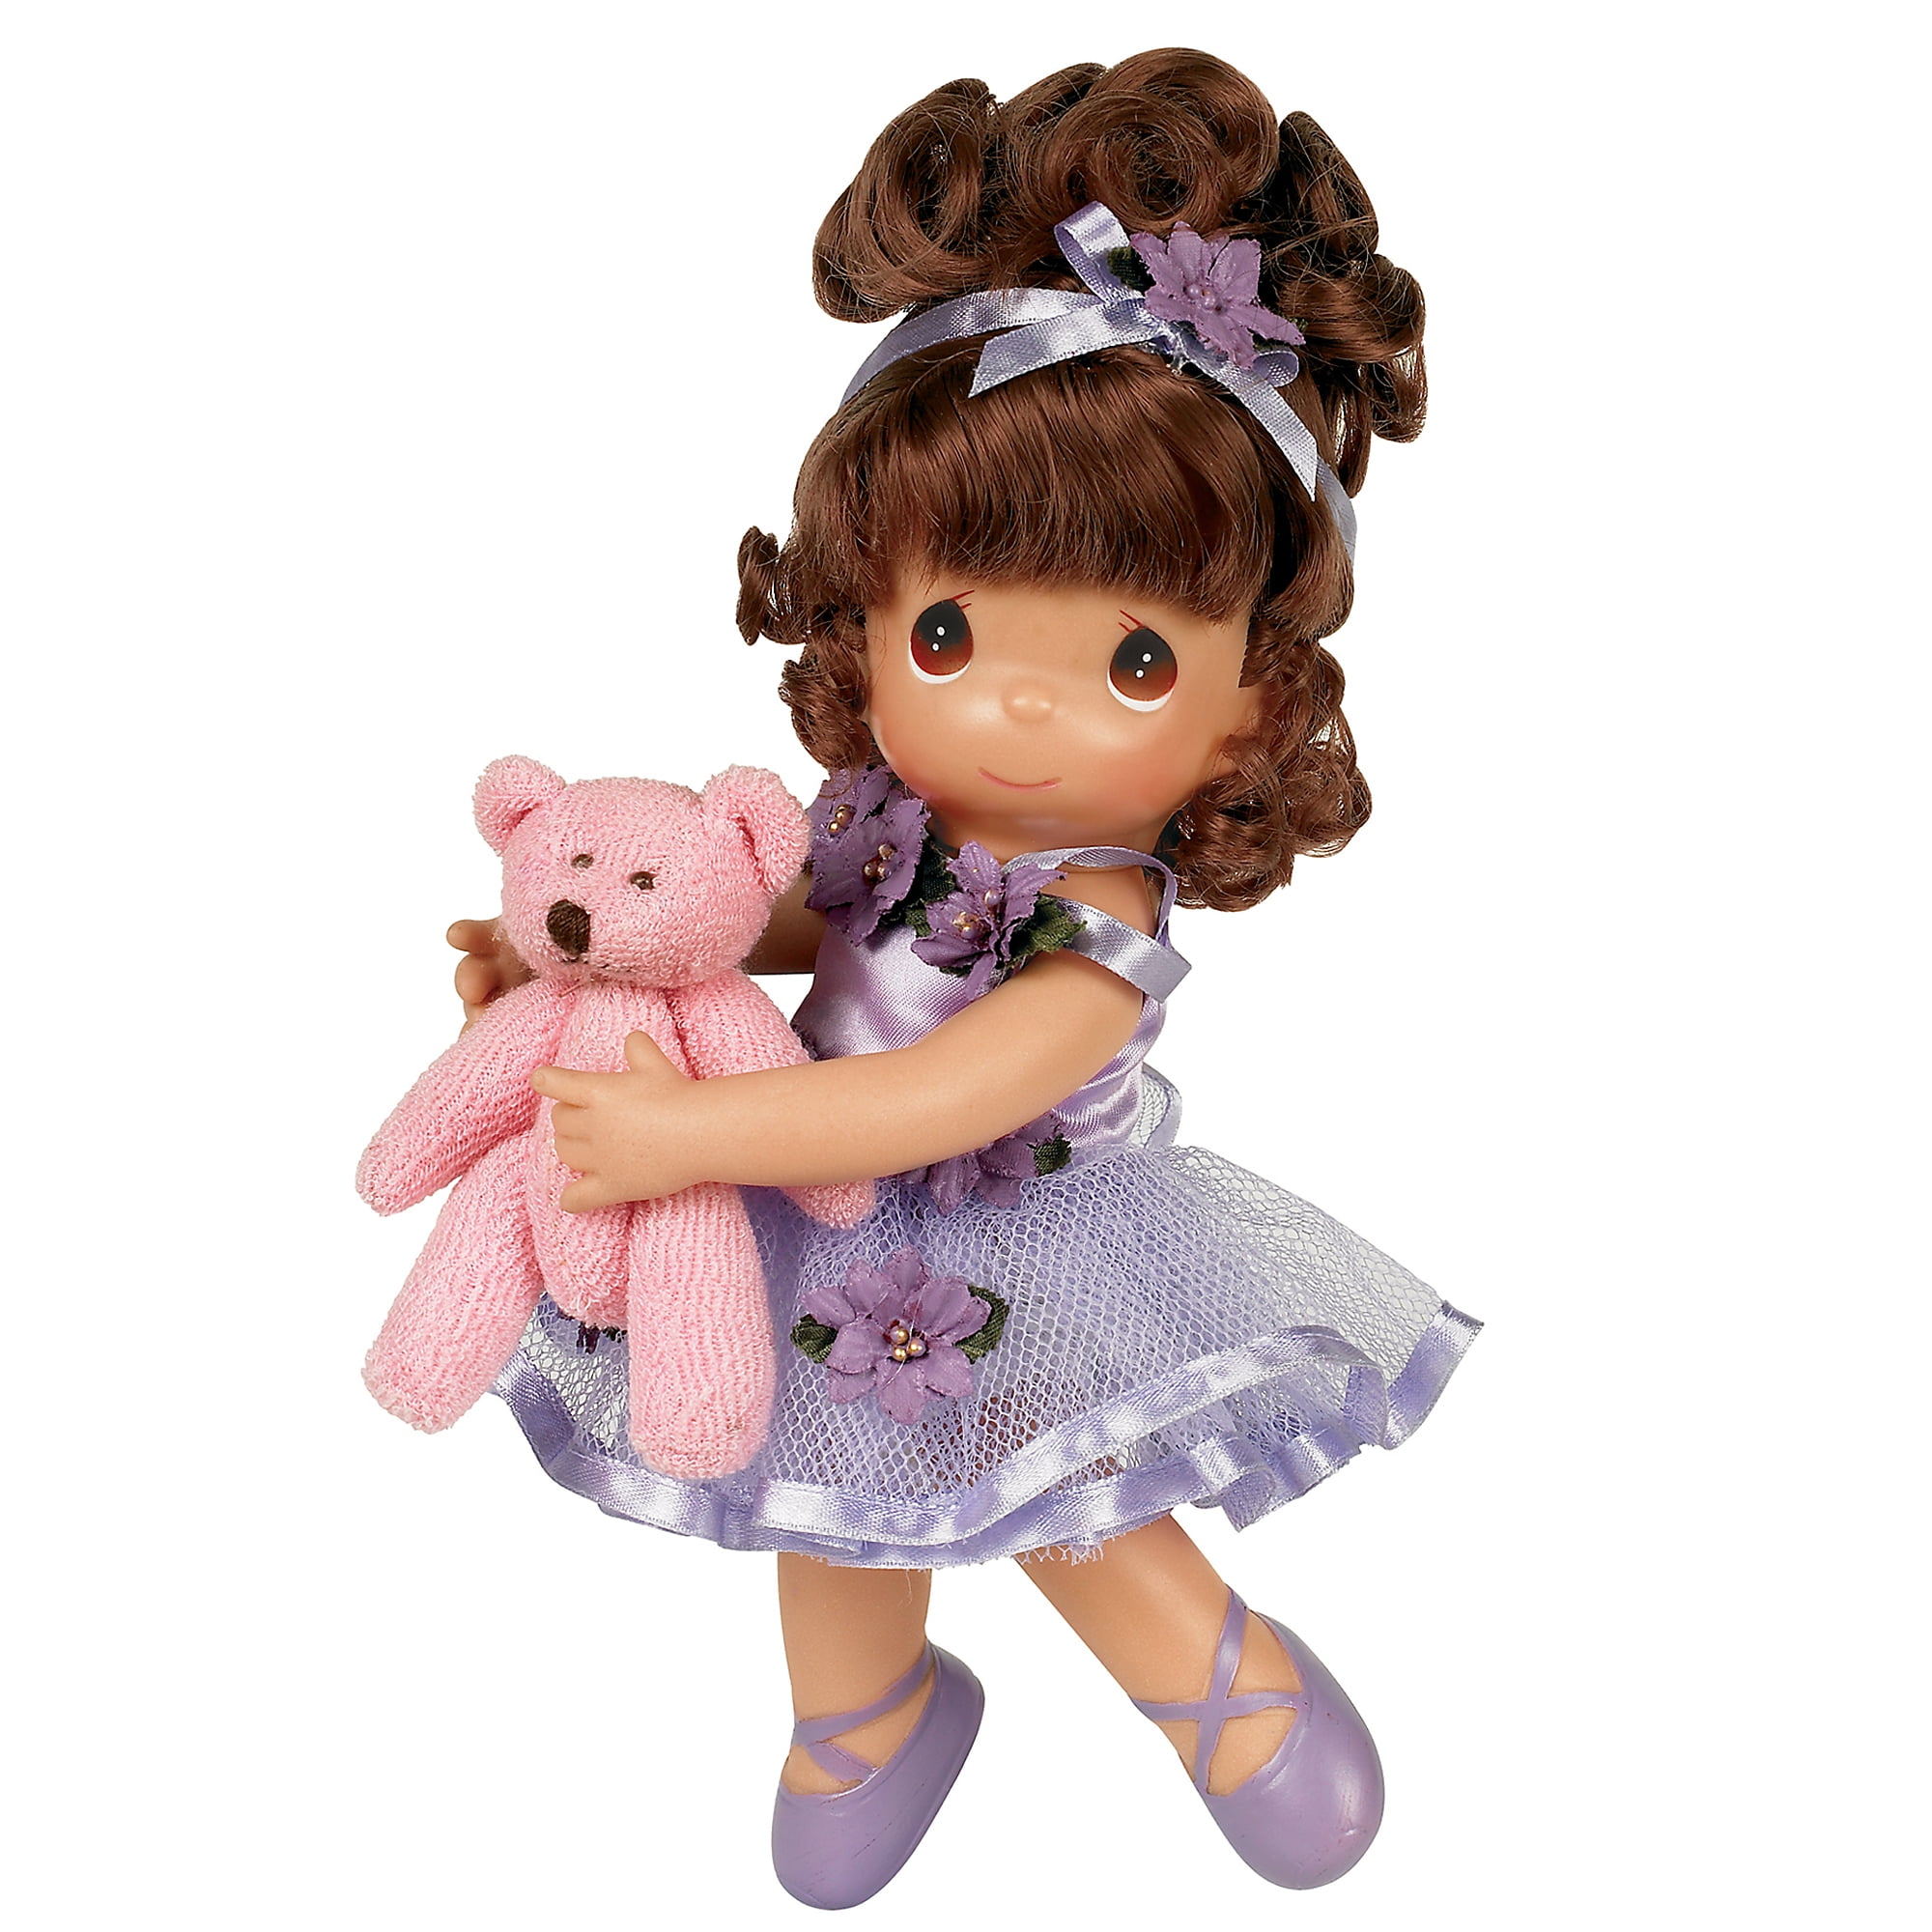 Heartfelt Wishes Precious Moments Dolls by The Doll Maker 12 inch Doll PRCM9 6601 Linda Rick Kayleigh